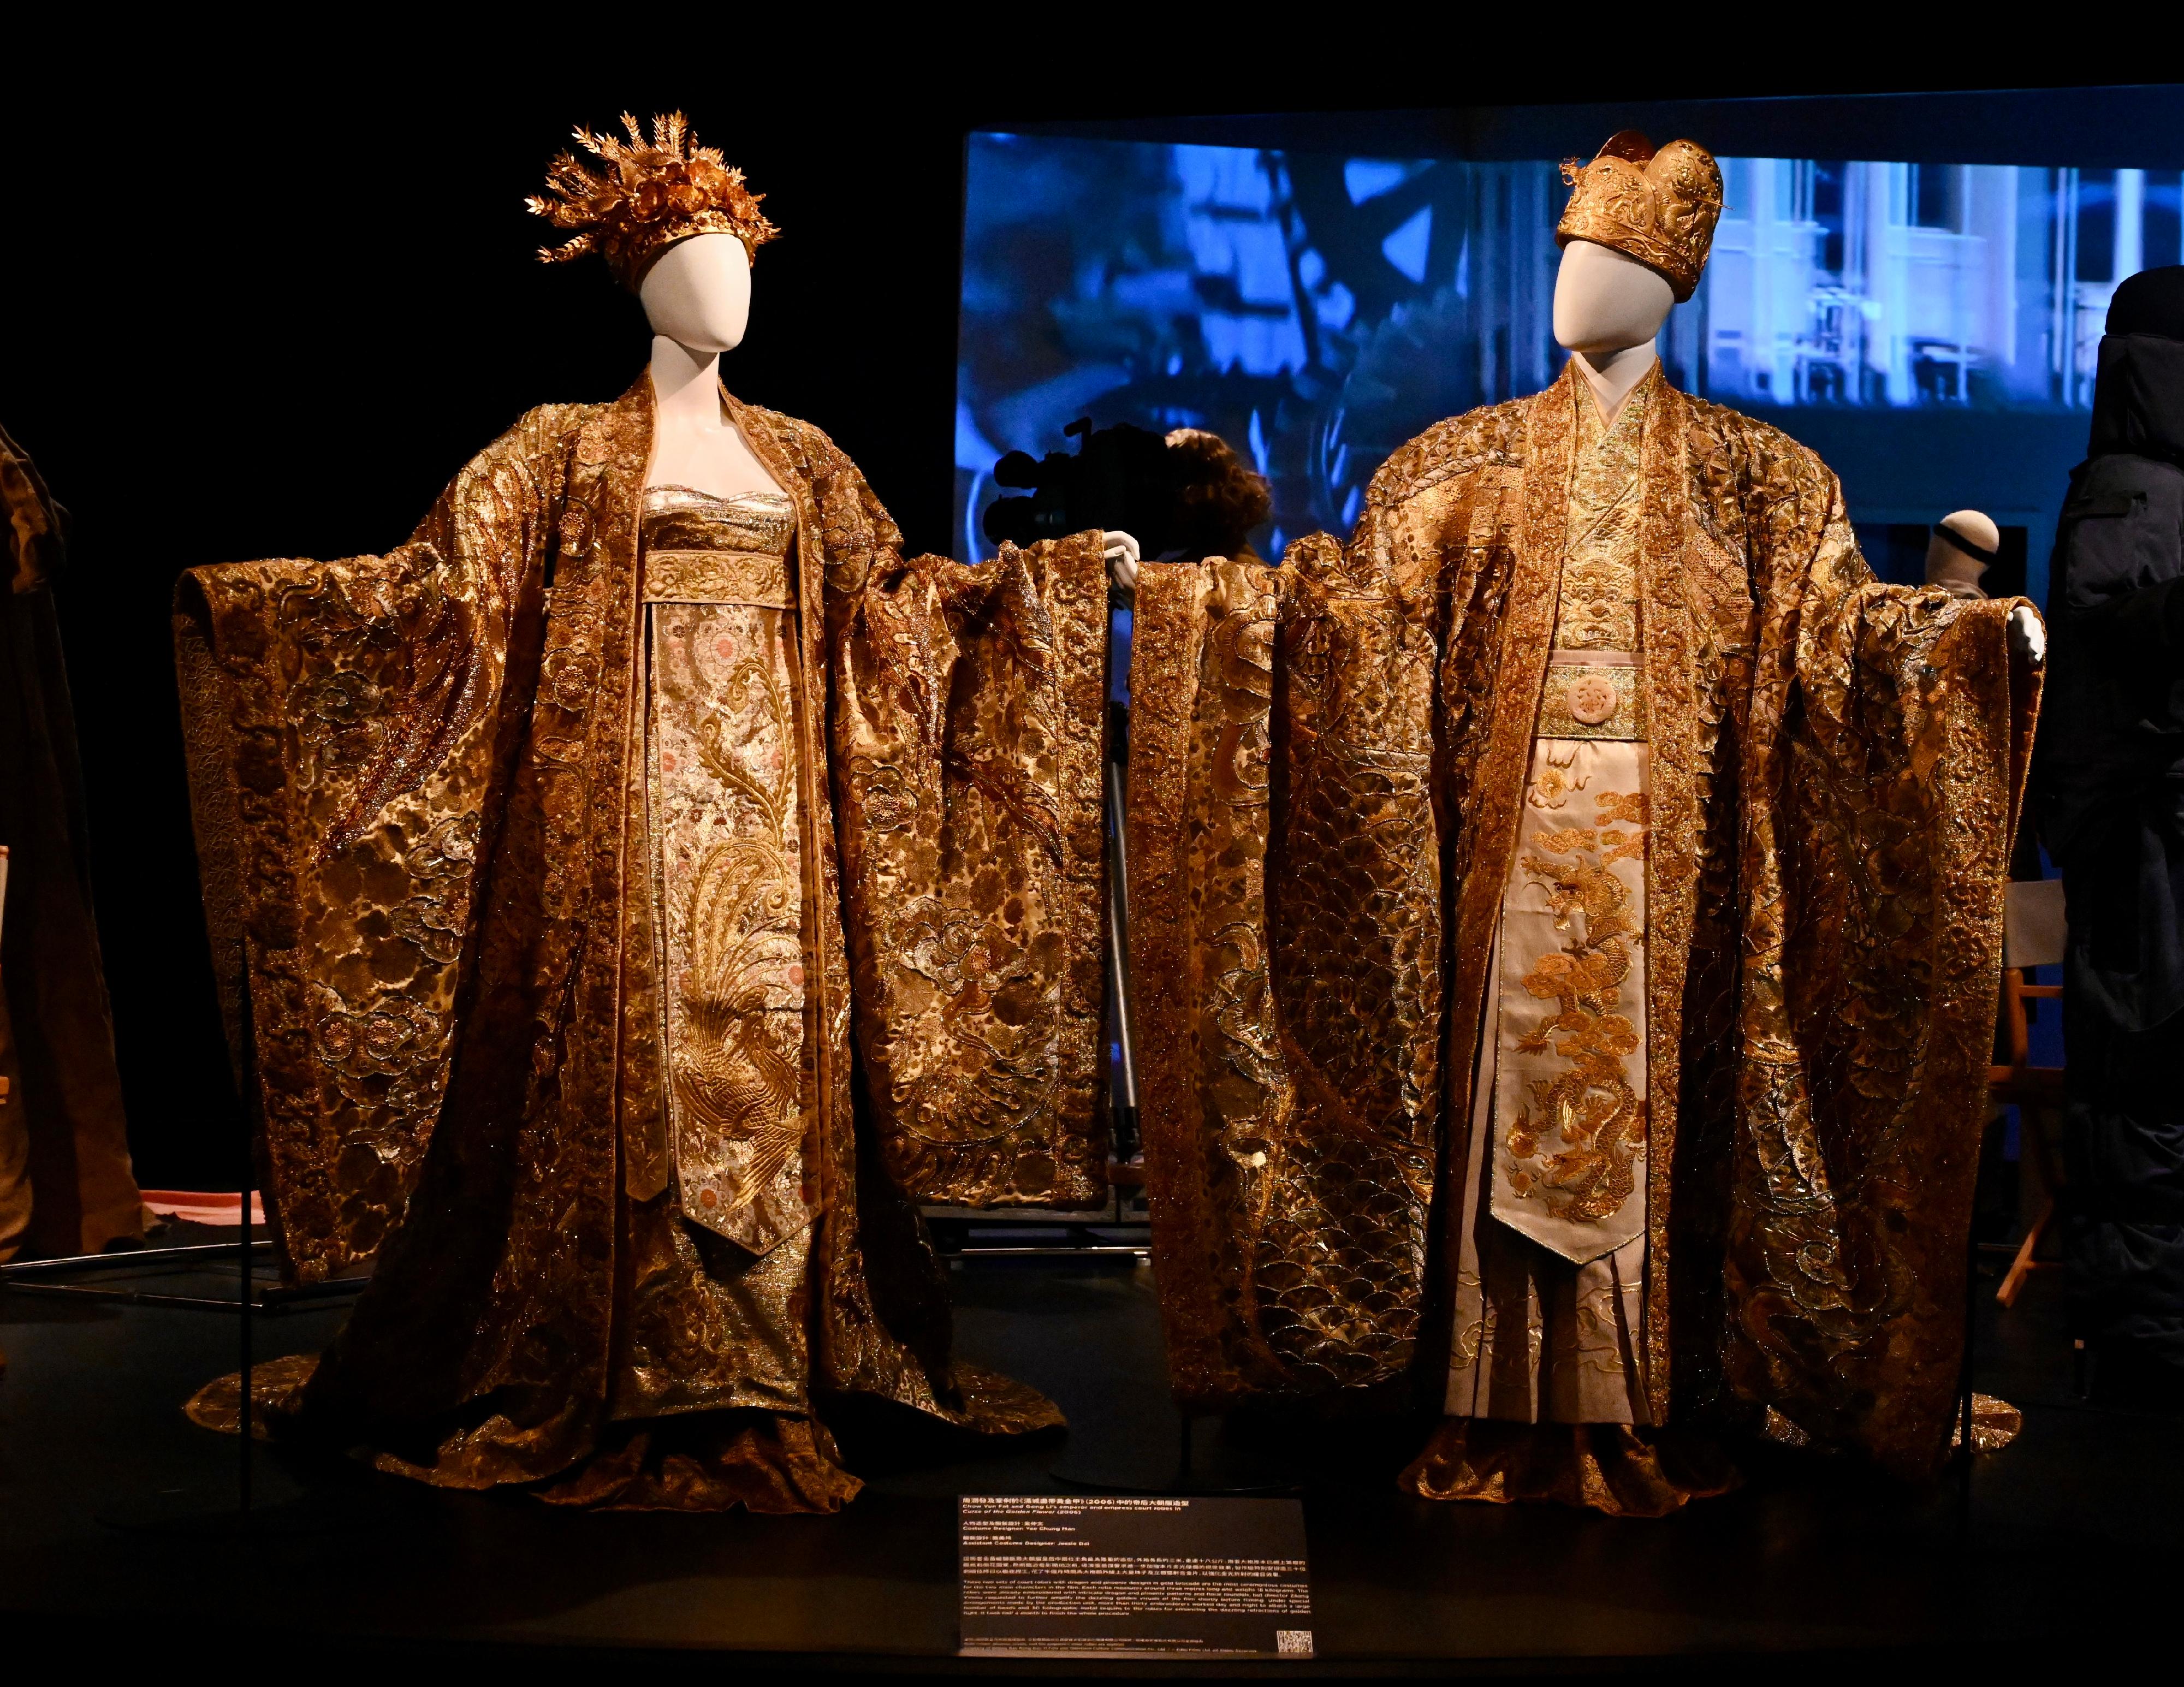 The opening ceremony for the "Out of Thin Air: Hong Kong Film Arts & Costumes Exhibition" was held today (May 2) at the Hong Kong Heritage Museum. Photo shows Chow Yun Fat and Gong Li's emperor and empress court robes from "Curse of the Golden Flower" (2006).
